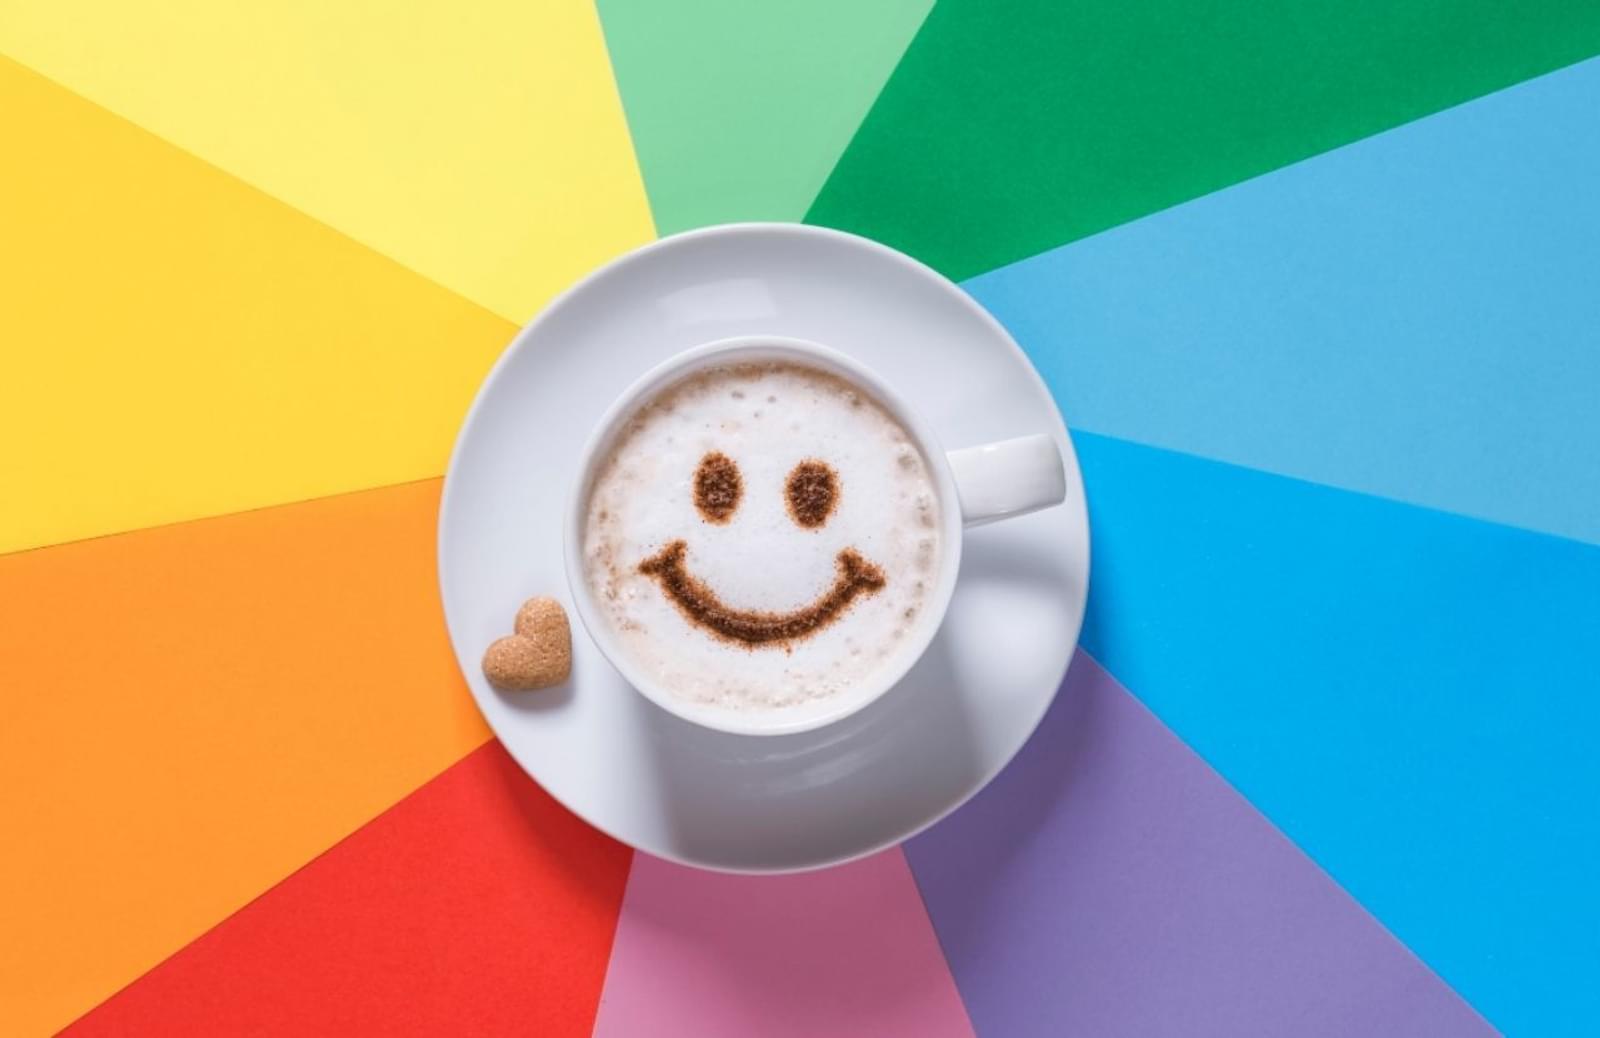 A cup of coffee with a smiley face dusted on top sits on a rainbow background